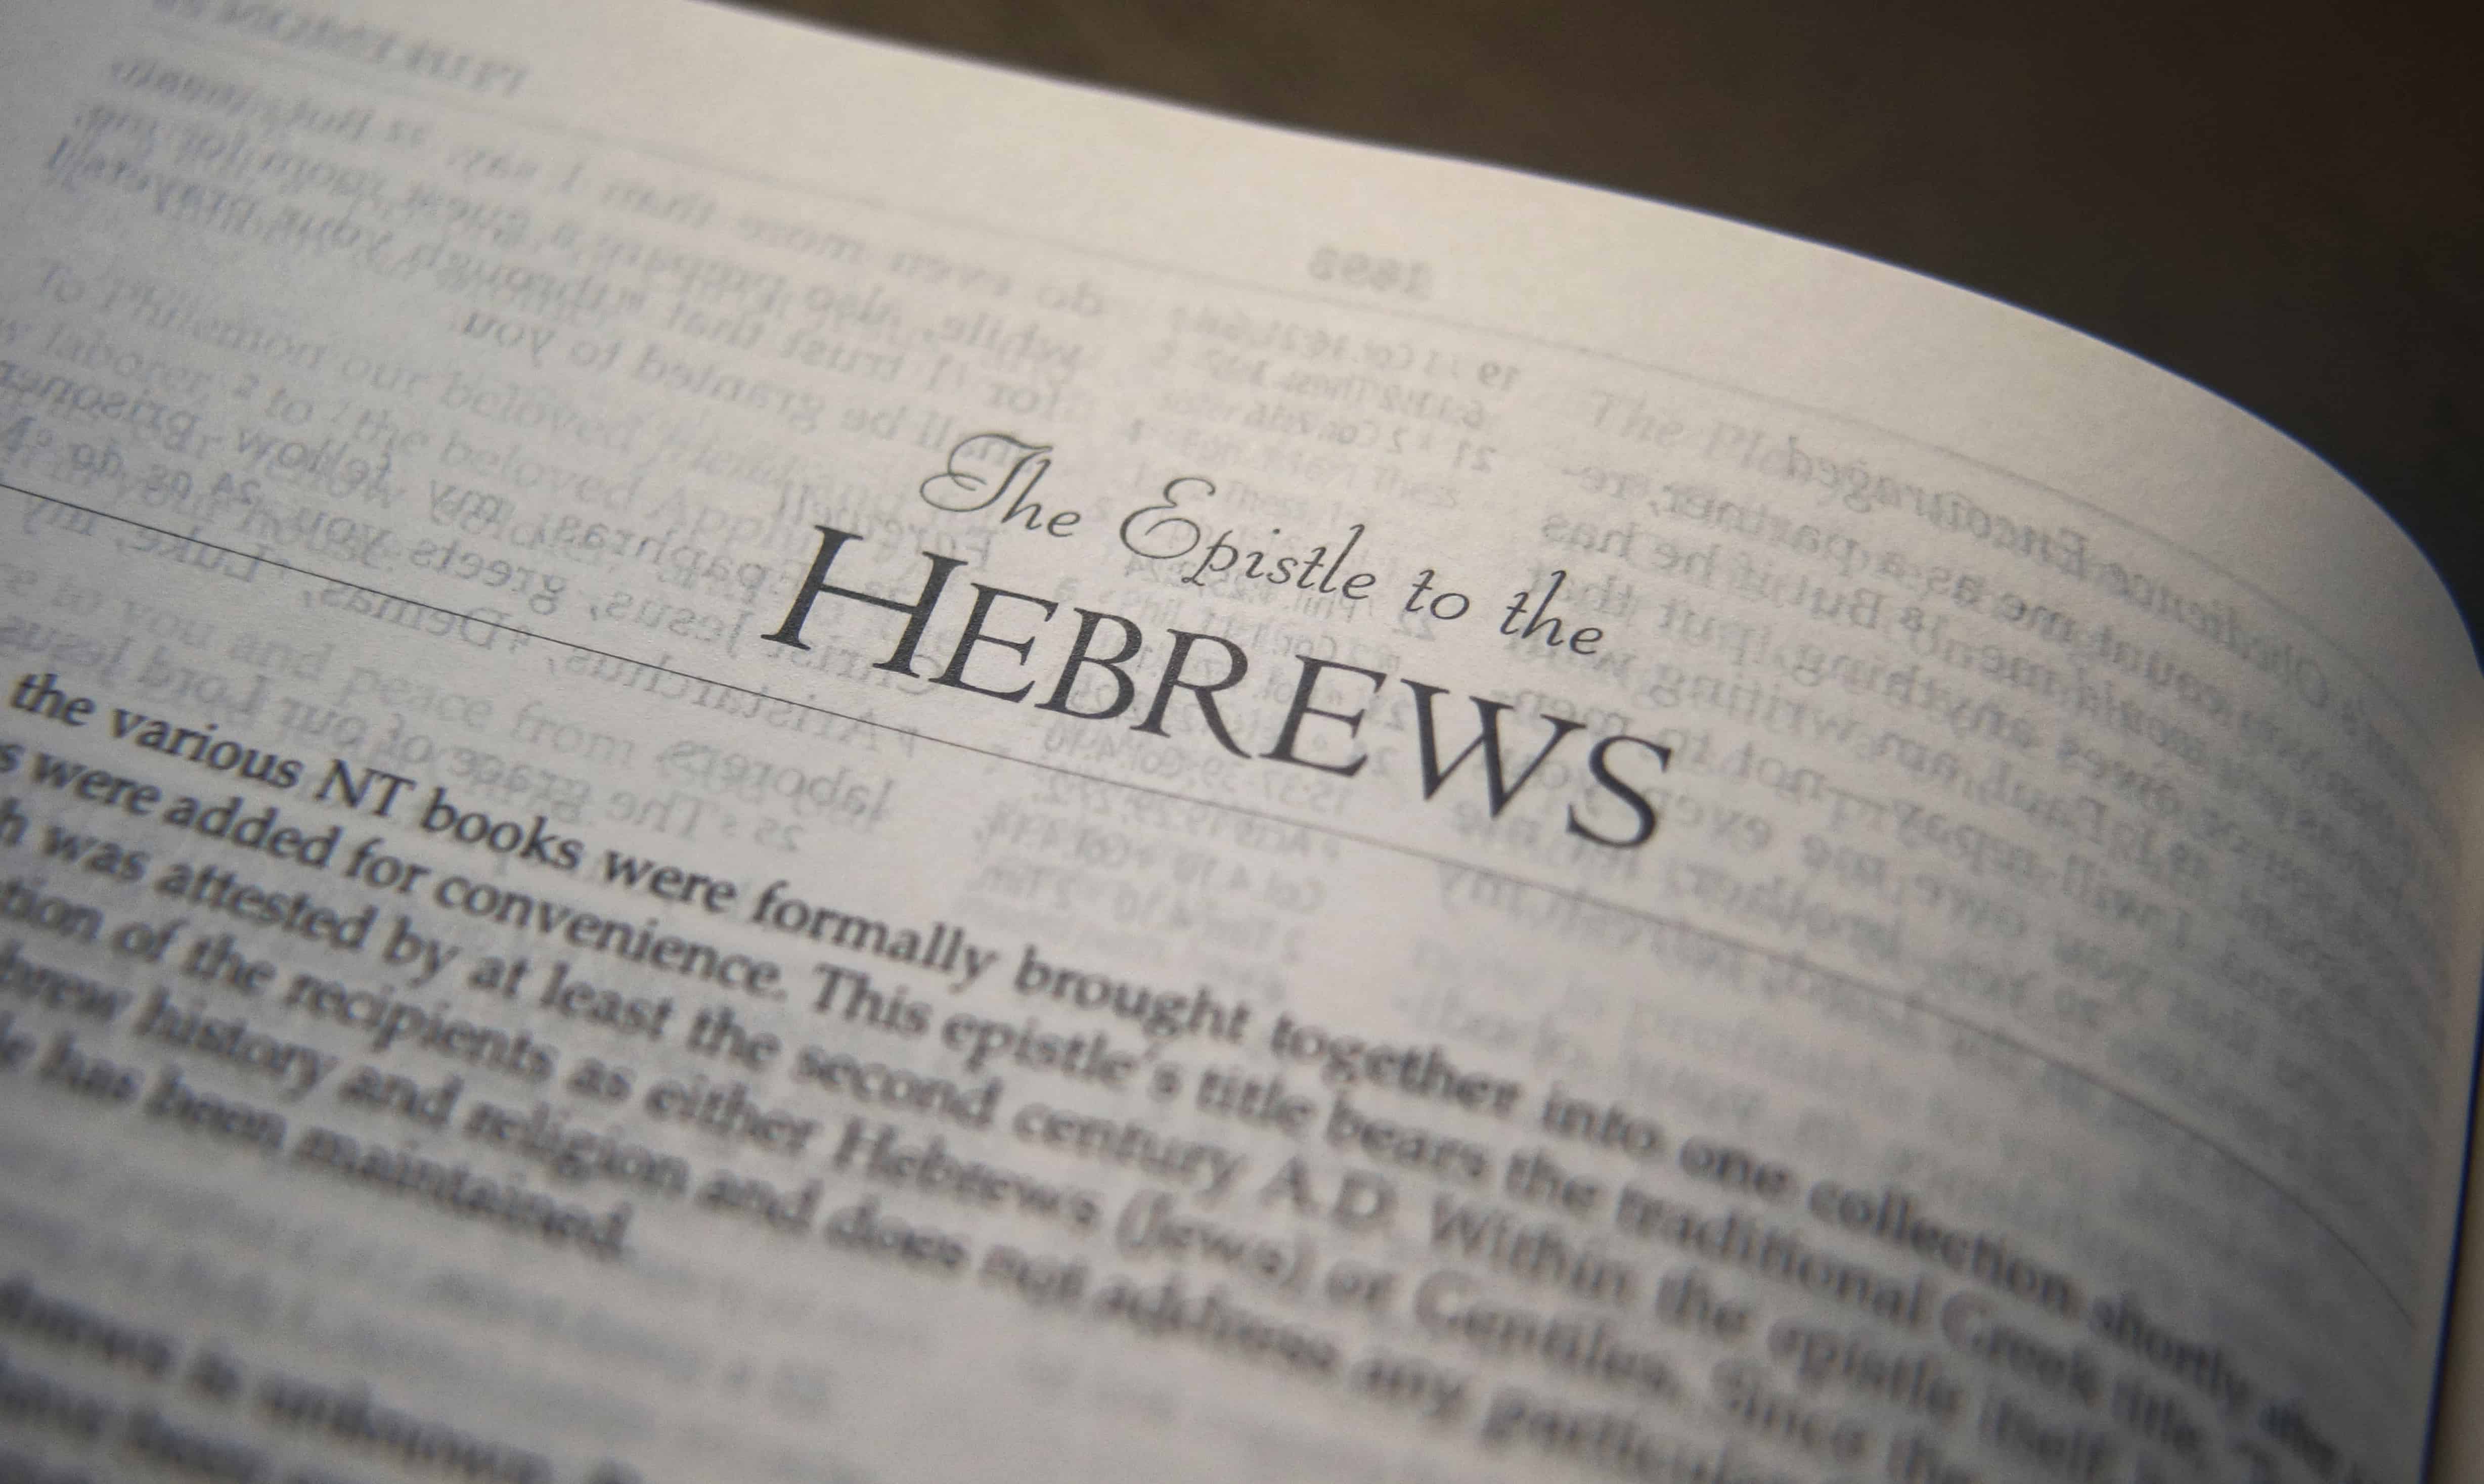 is-the-book-of-hebrews-still-relevant-today